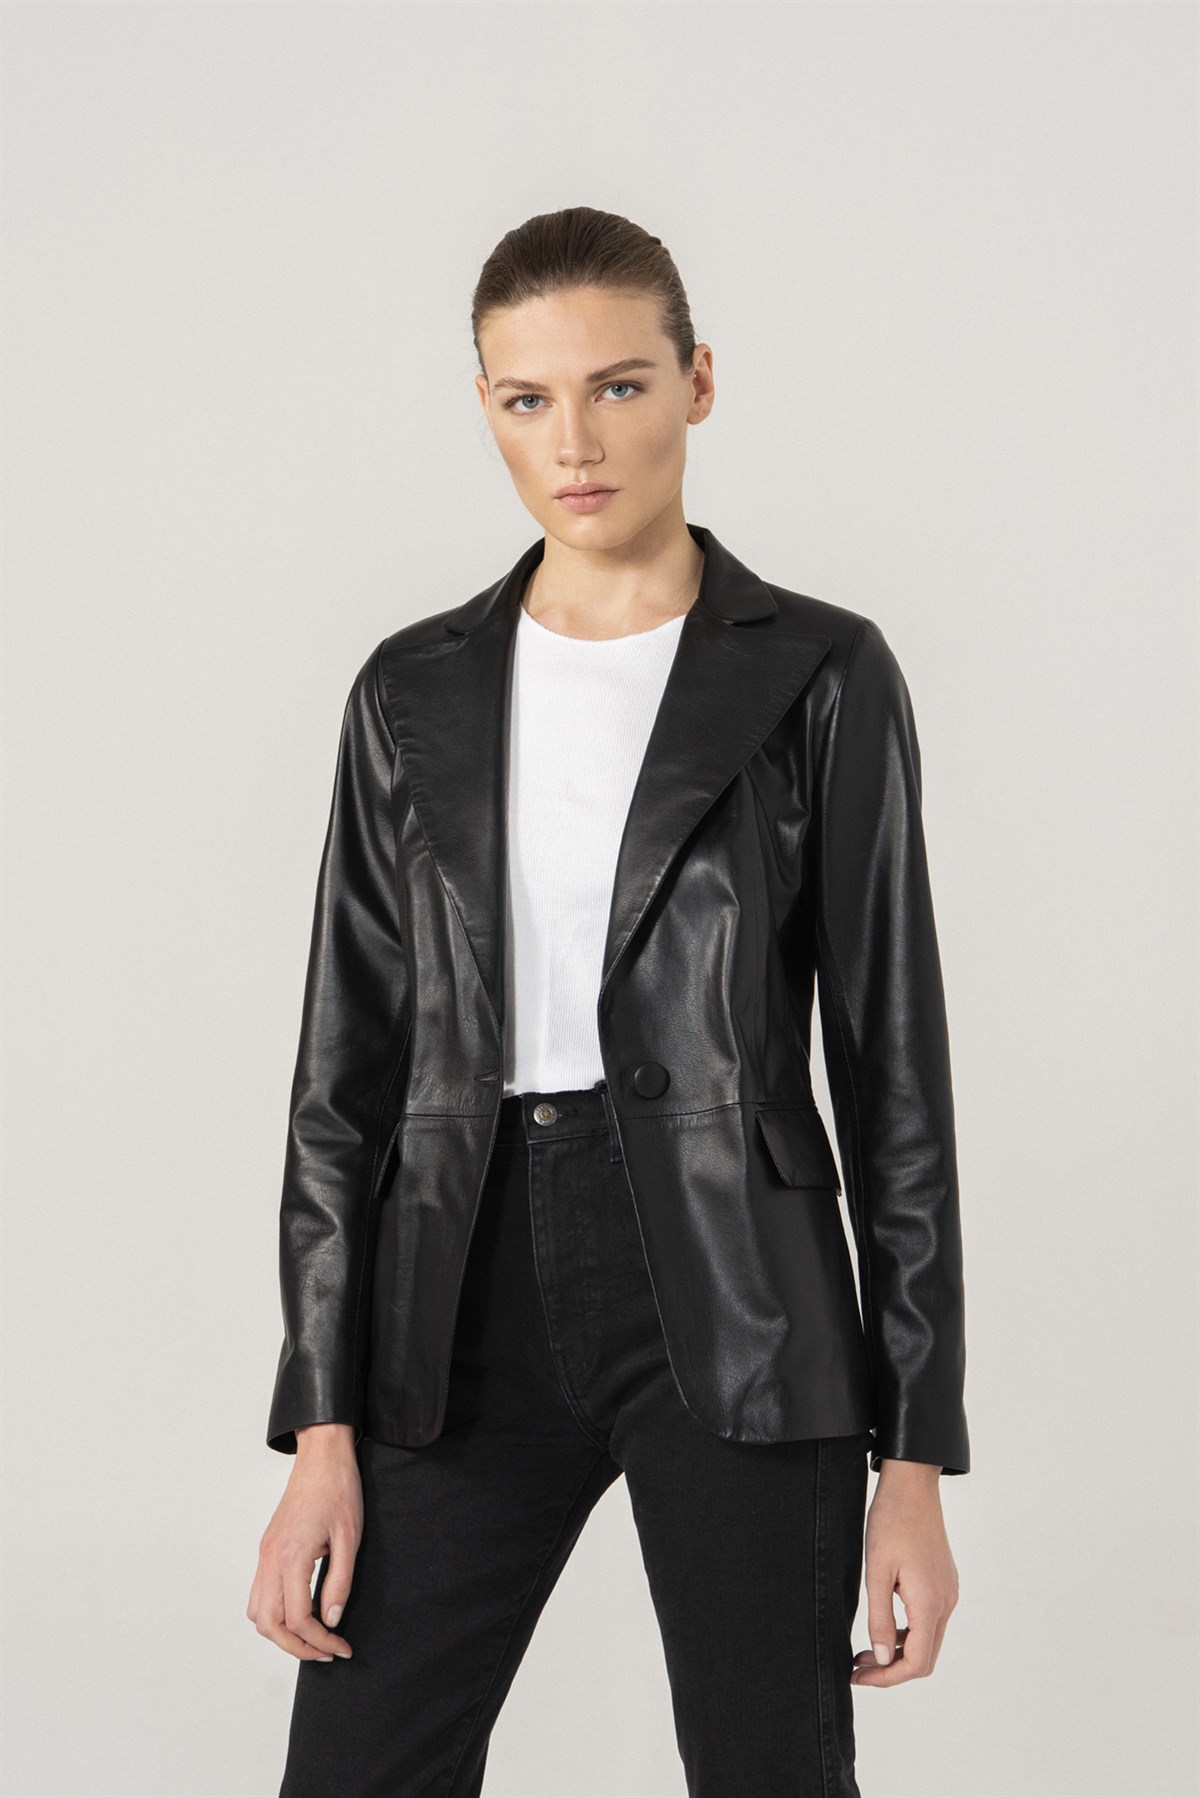 Girls In Leather Jackets | lupon.gov.ph